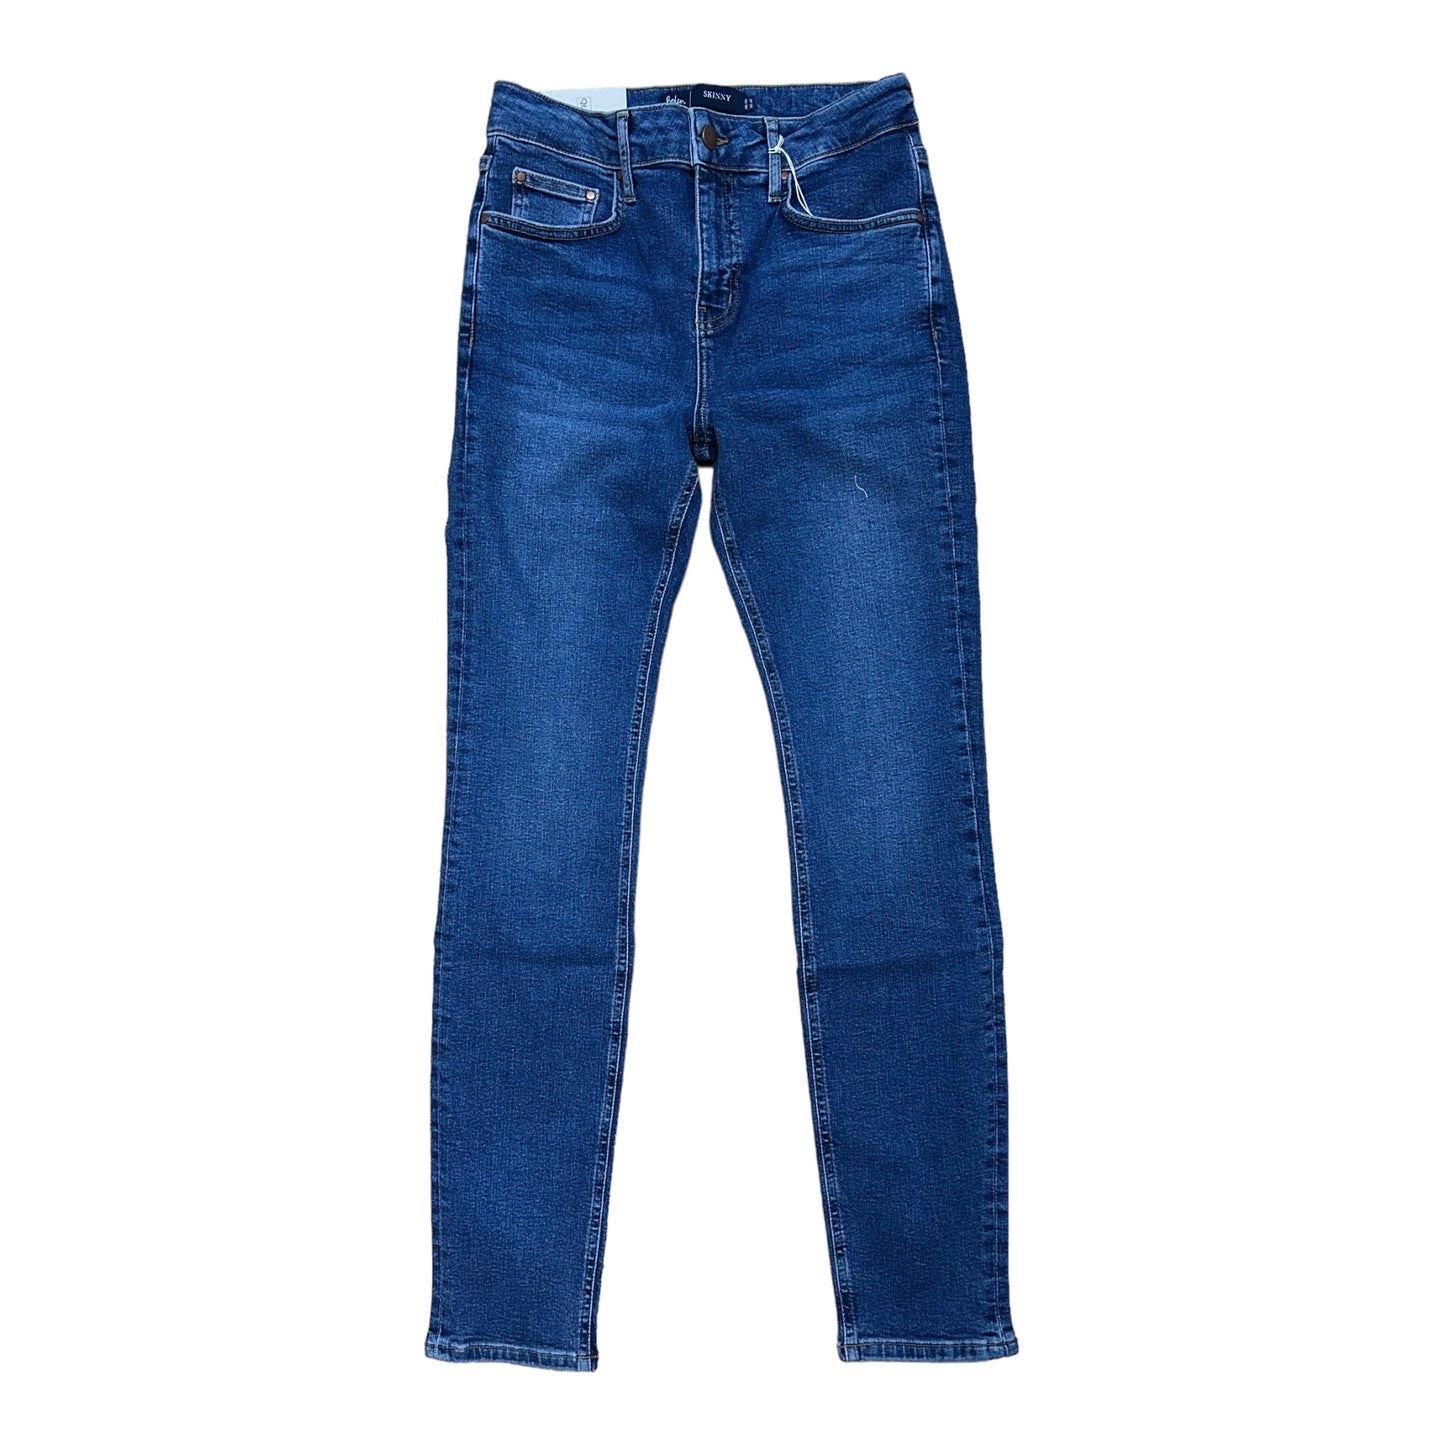 Boden Stretch Skinny Jeans - Recurring.Life